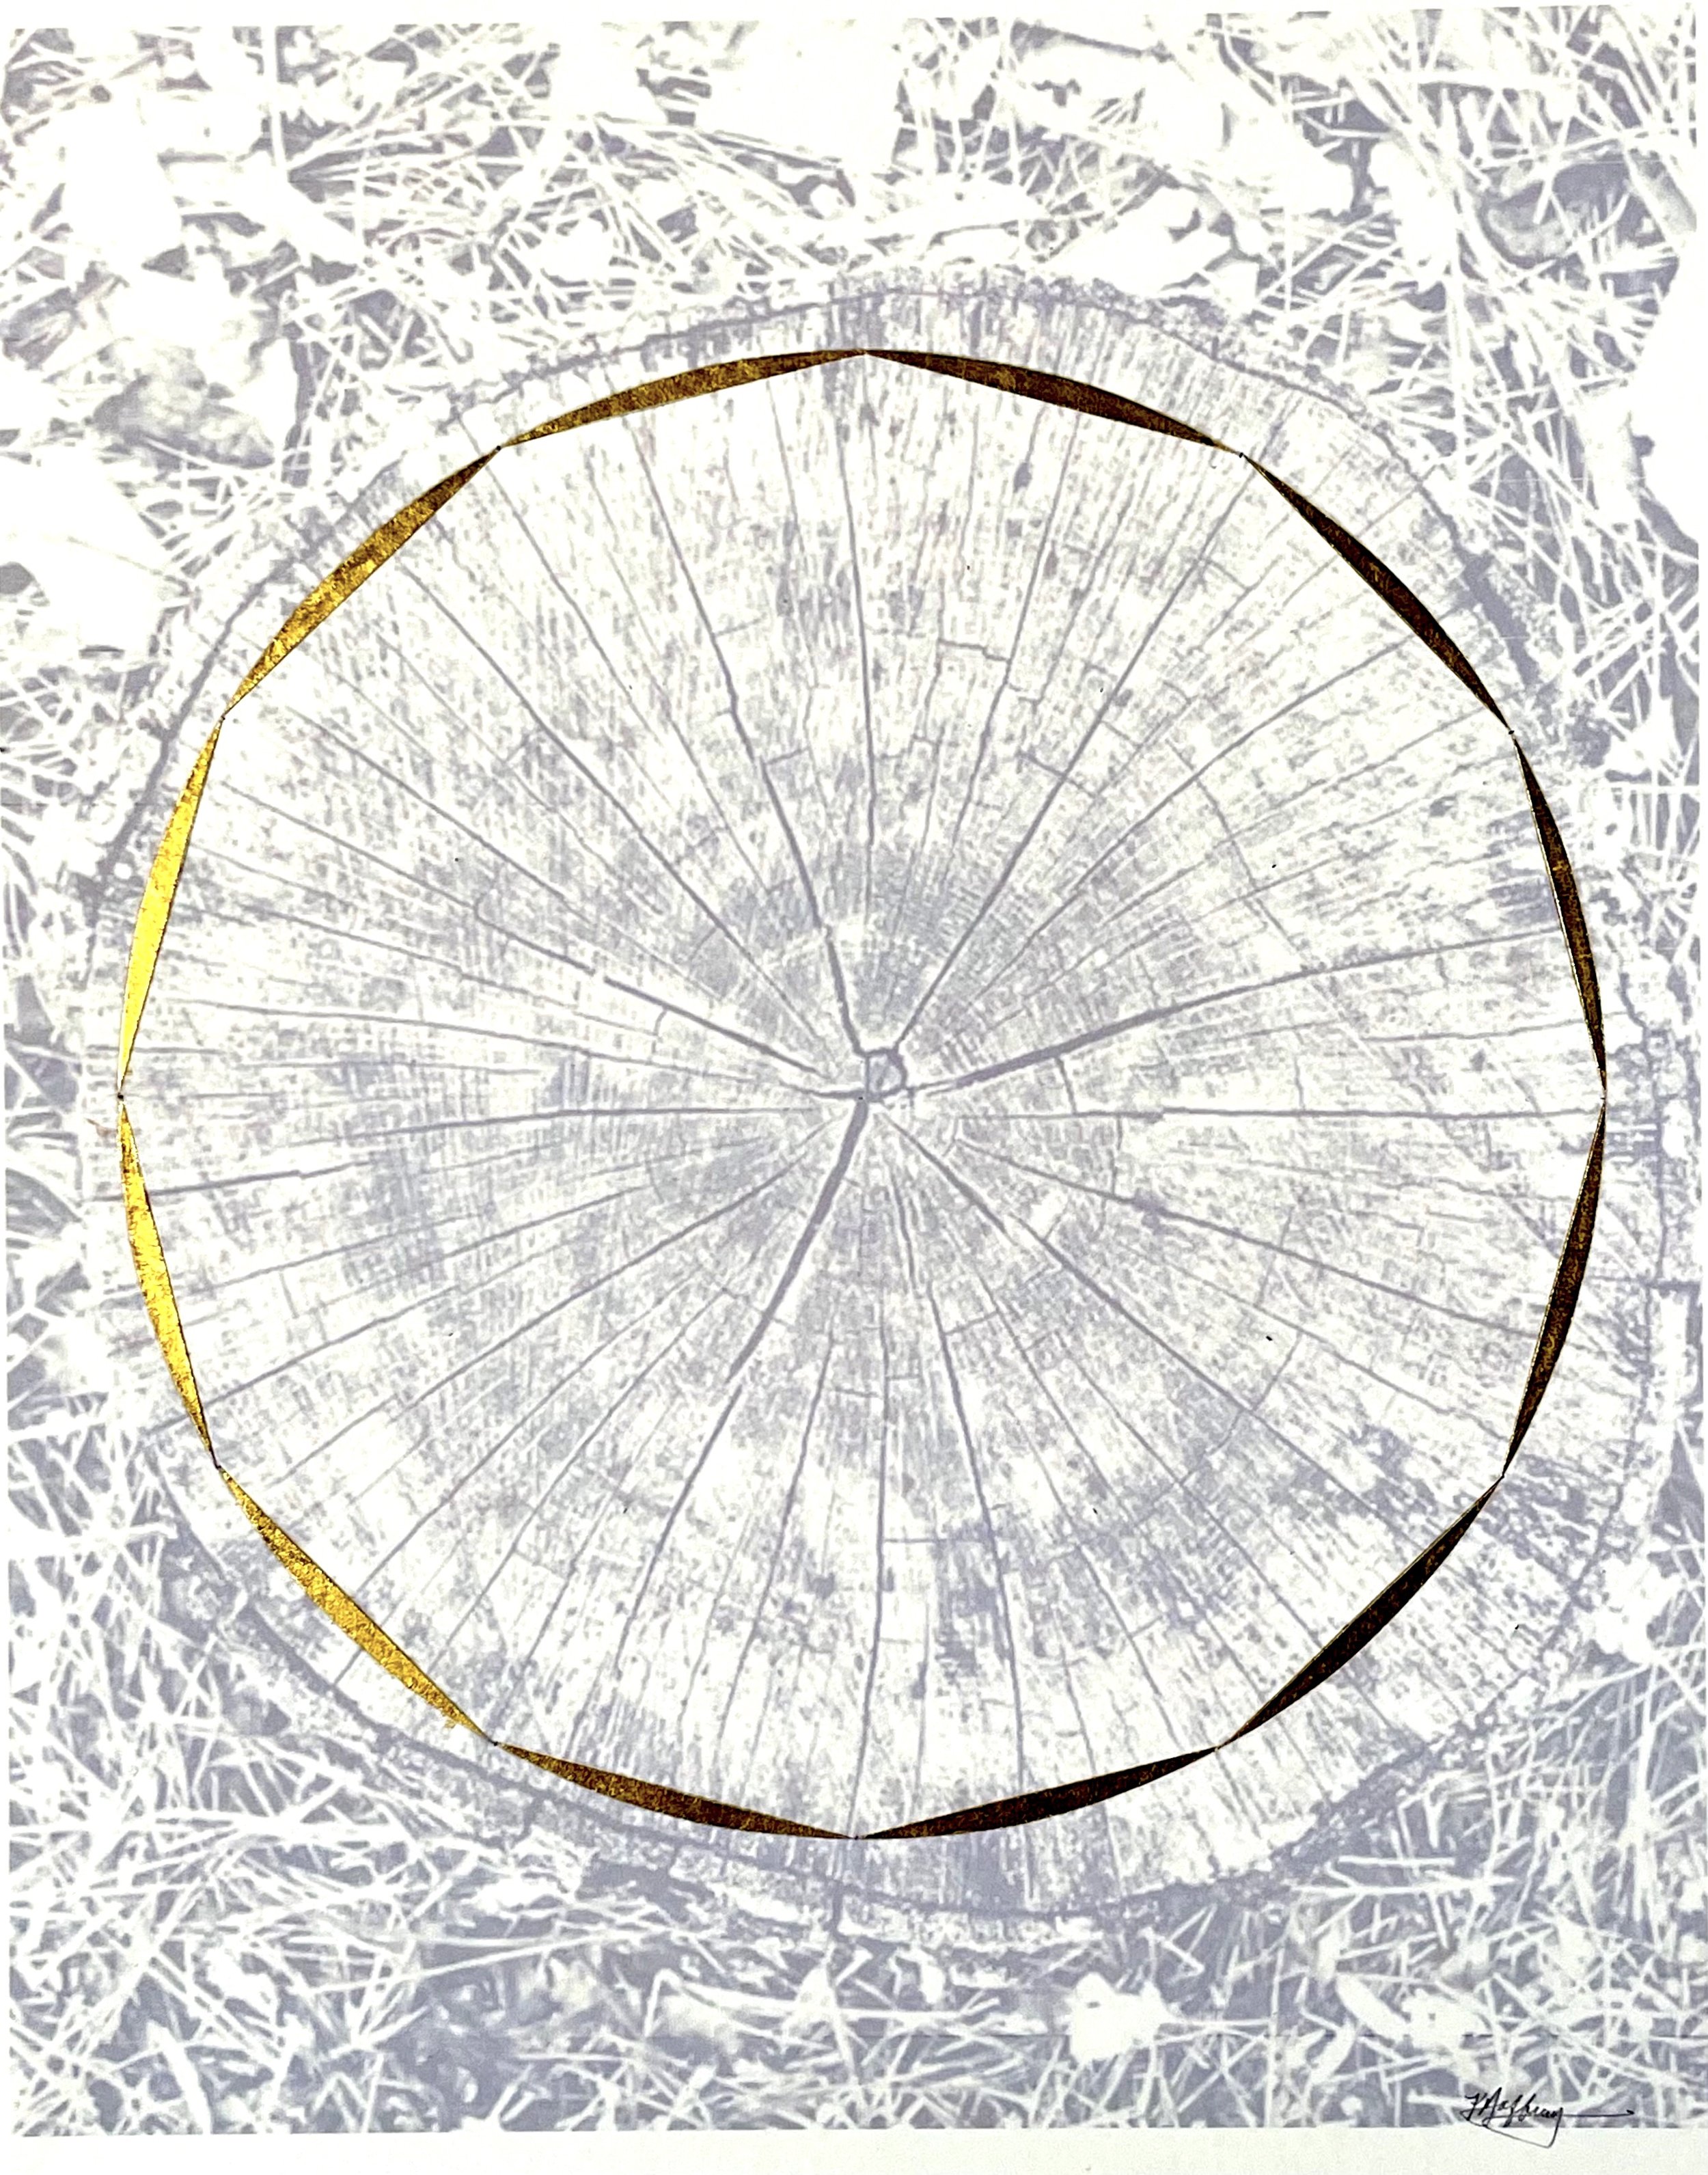 NATURE'S MANDALA #4 | 11 x 14 inches / 27.9 x 35.6 cm, photograph printed on Fabriano paper, gold leaf, 2022